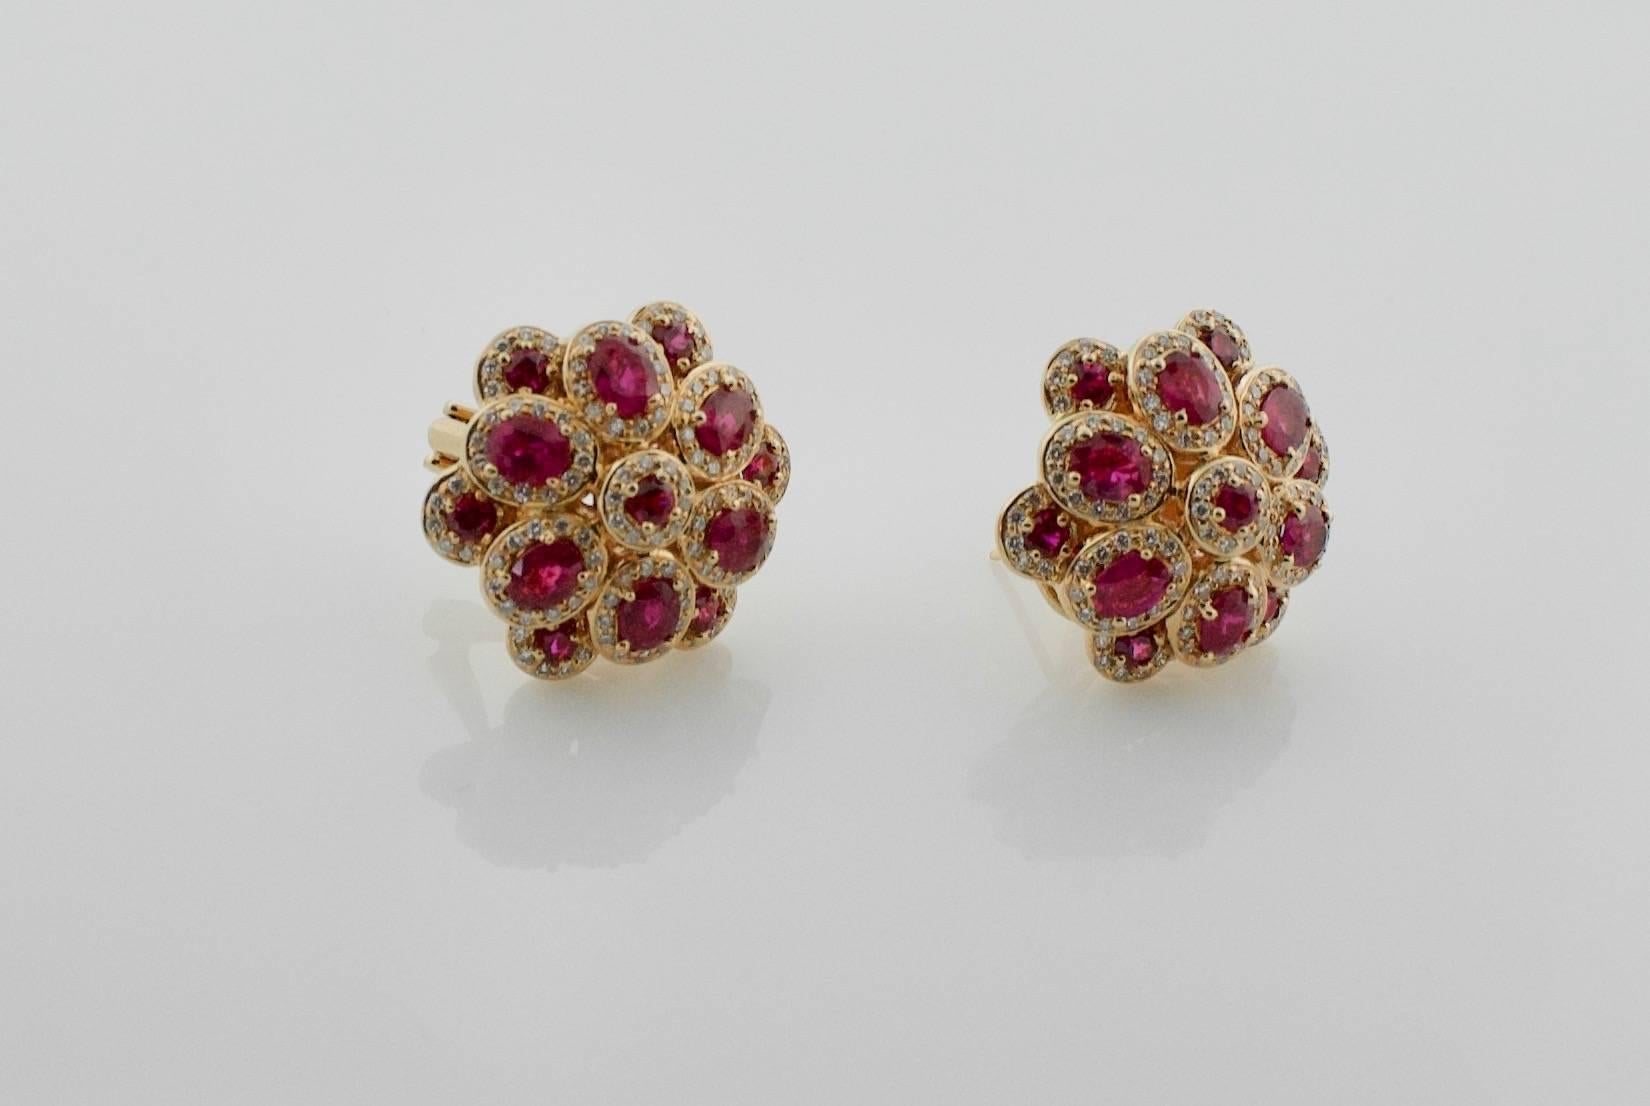 Ruby and Diamond Earrings in 18k Rose Gold 5.25 cts. in Ruby. [bright with no imperfections visible to the naked eye]
1.20 in Round Brilliant Cut Diamonds [GH VS-SI1]
Clip Back